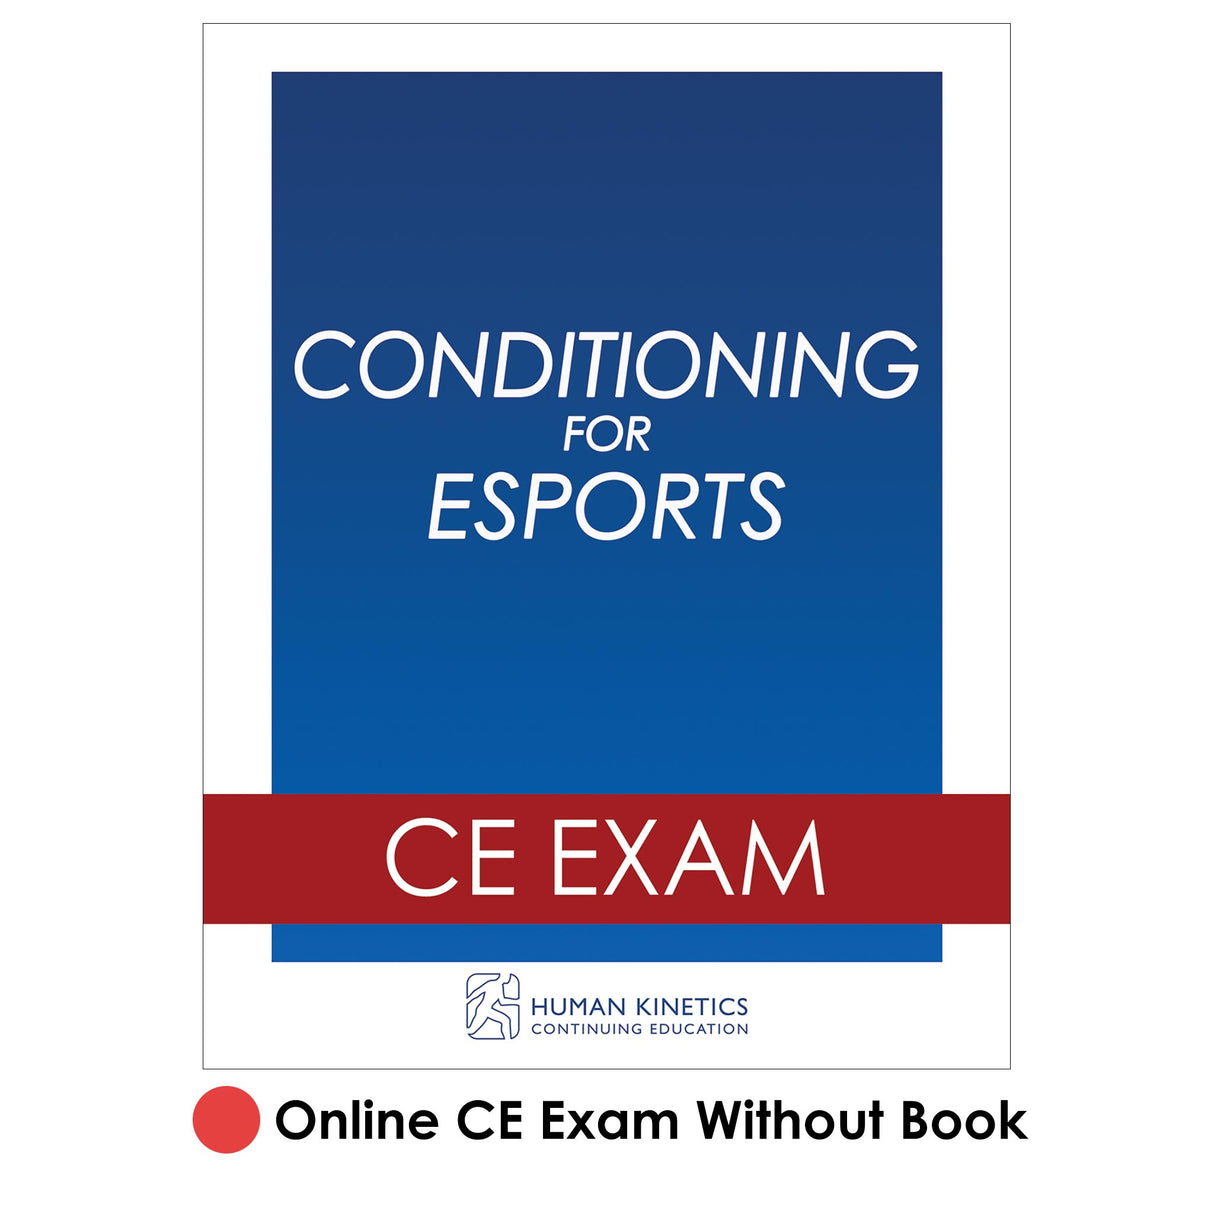 Conditioning for Esports Online CE Exam Without Book